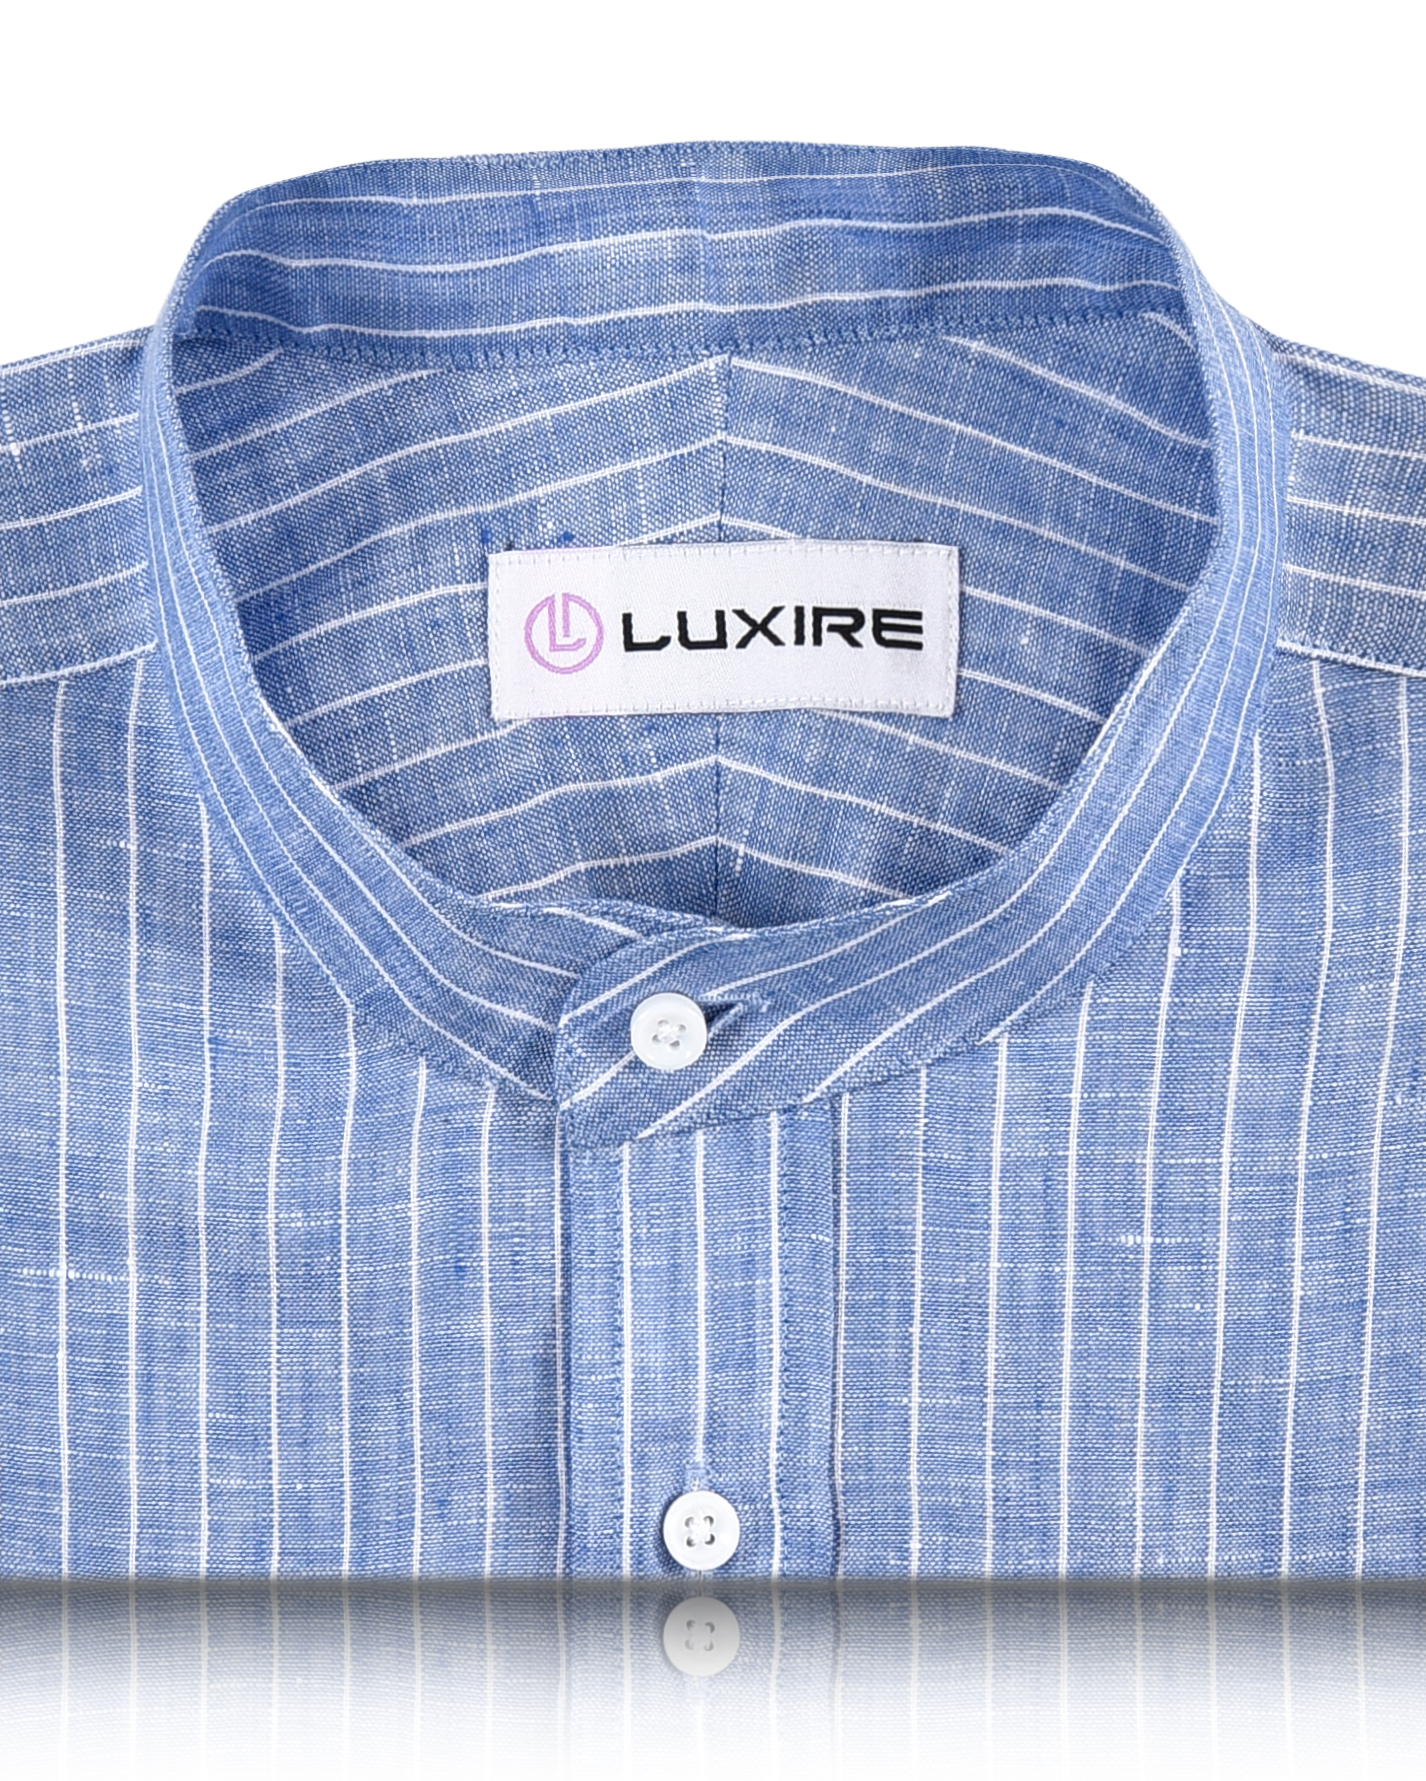 Collar of the custom linen shirt for men in blue with white chalk stripes by Luxire Clothing